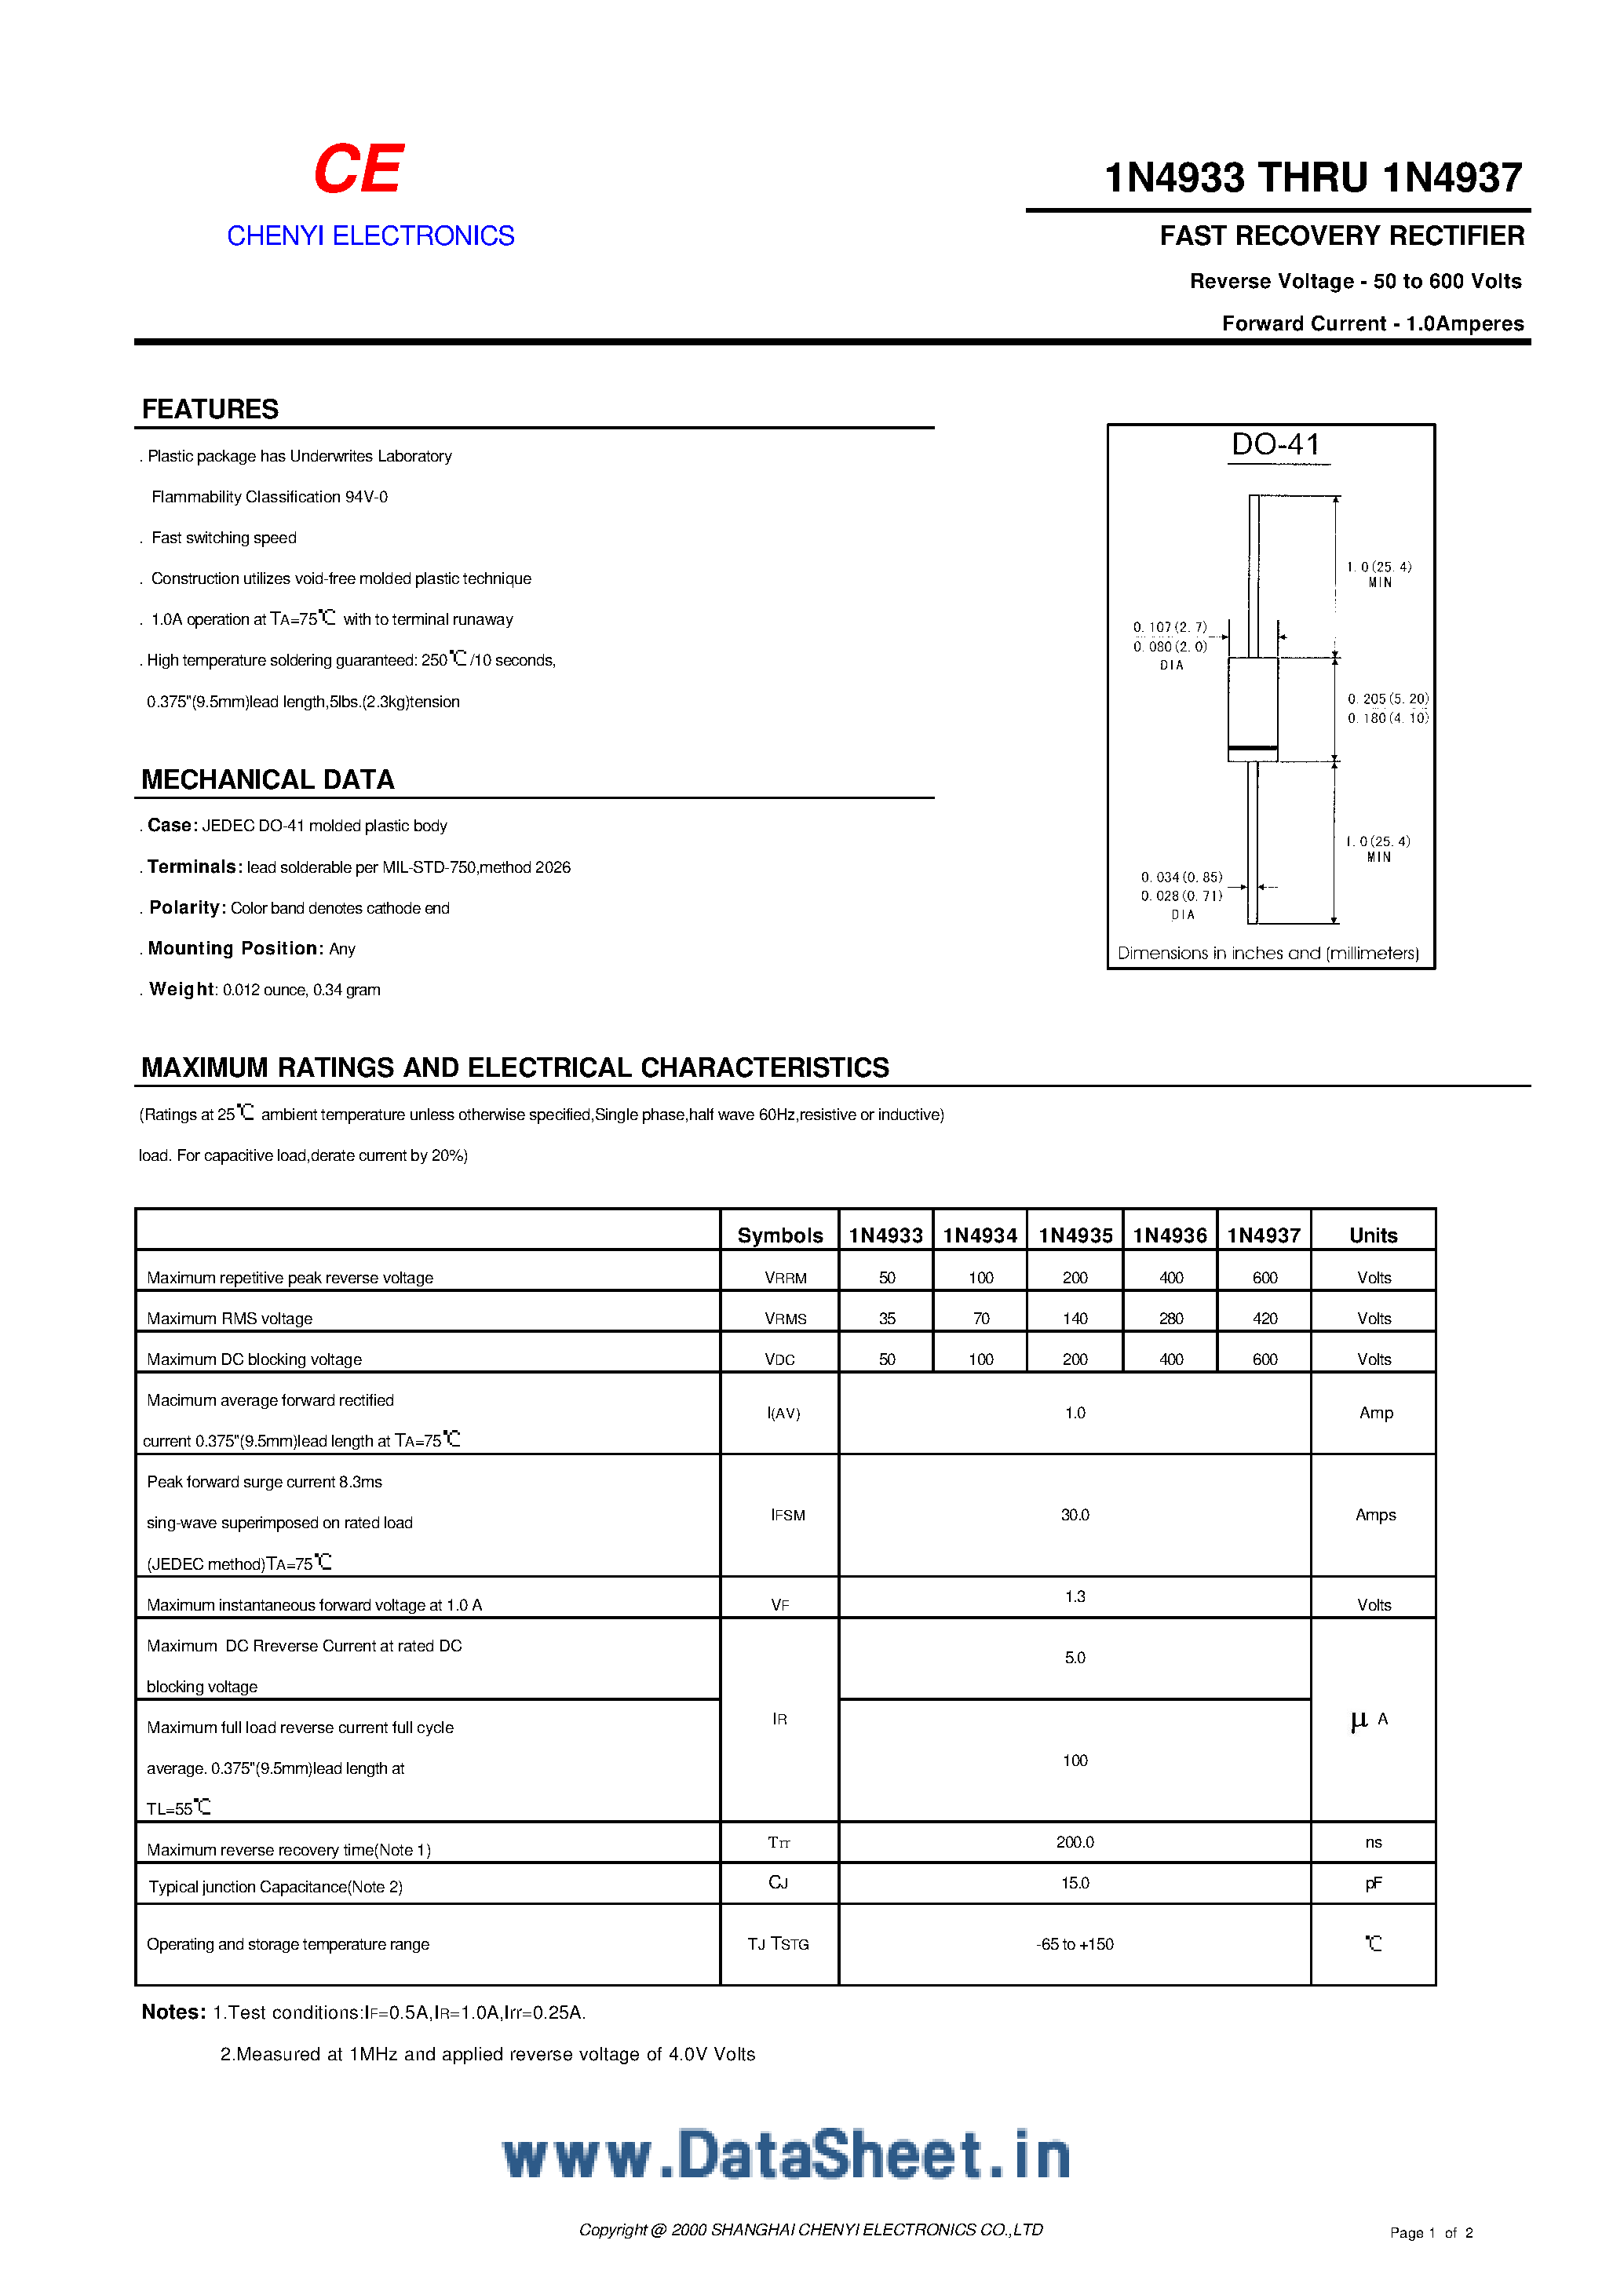 Datasheet IN4933 - (IN4933 - IN4937) Fast Recovery Rectifier page 1